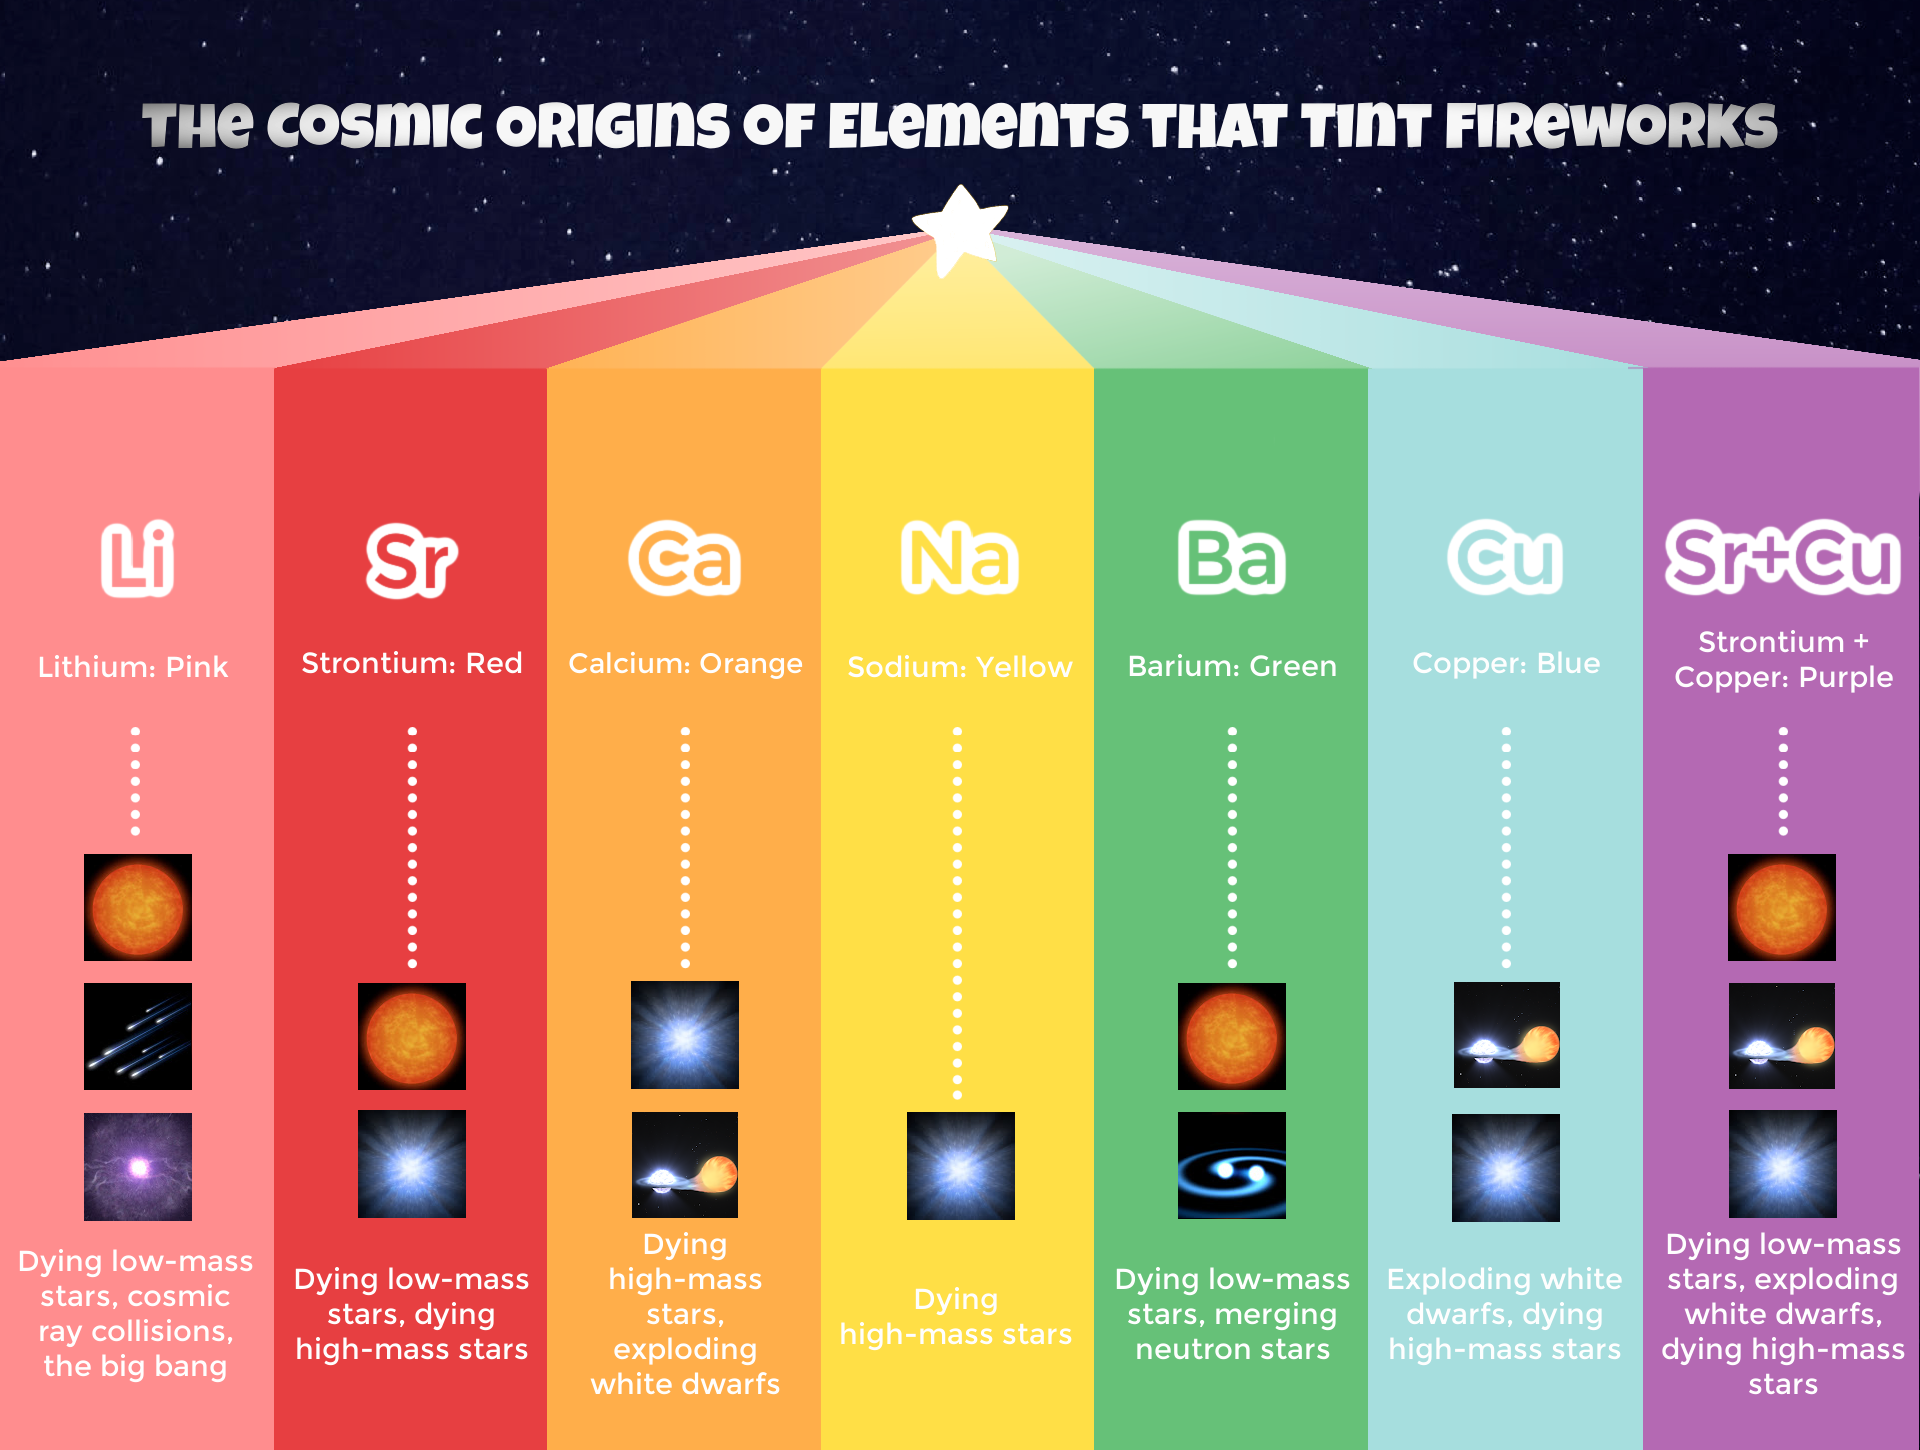 Infographic titled "The Cosmic Origins of Elements that Tiny Fireworks" showing different elements used by fireworks.